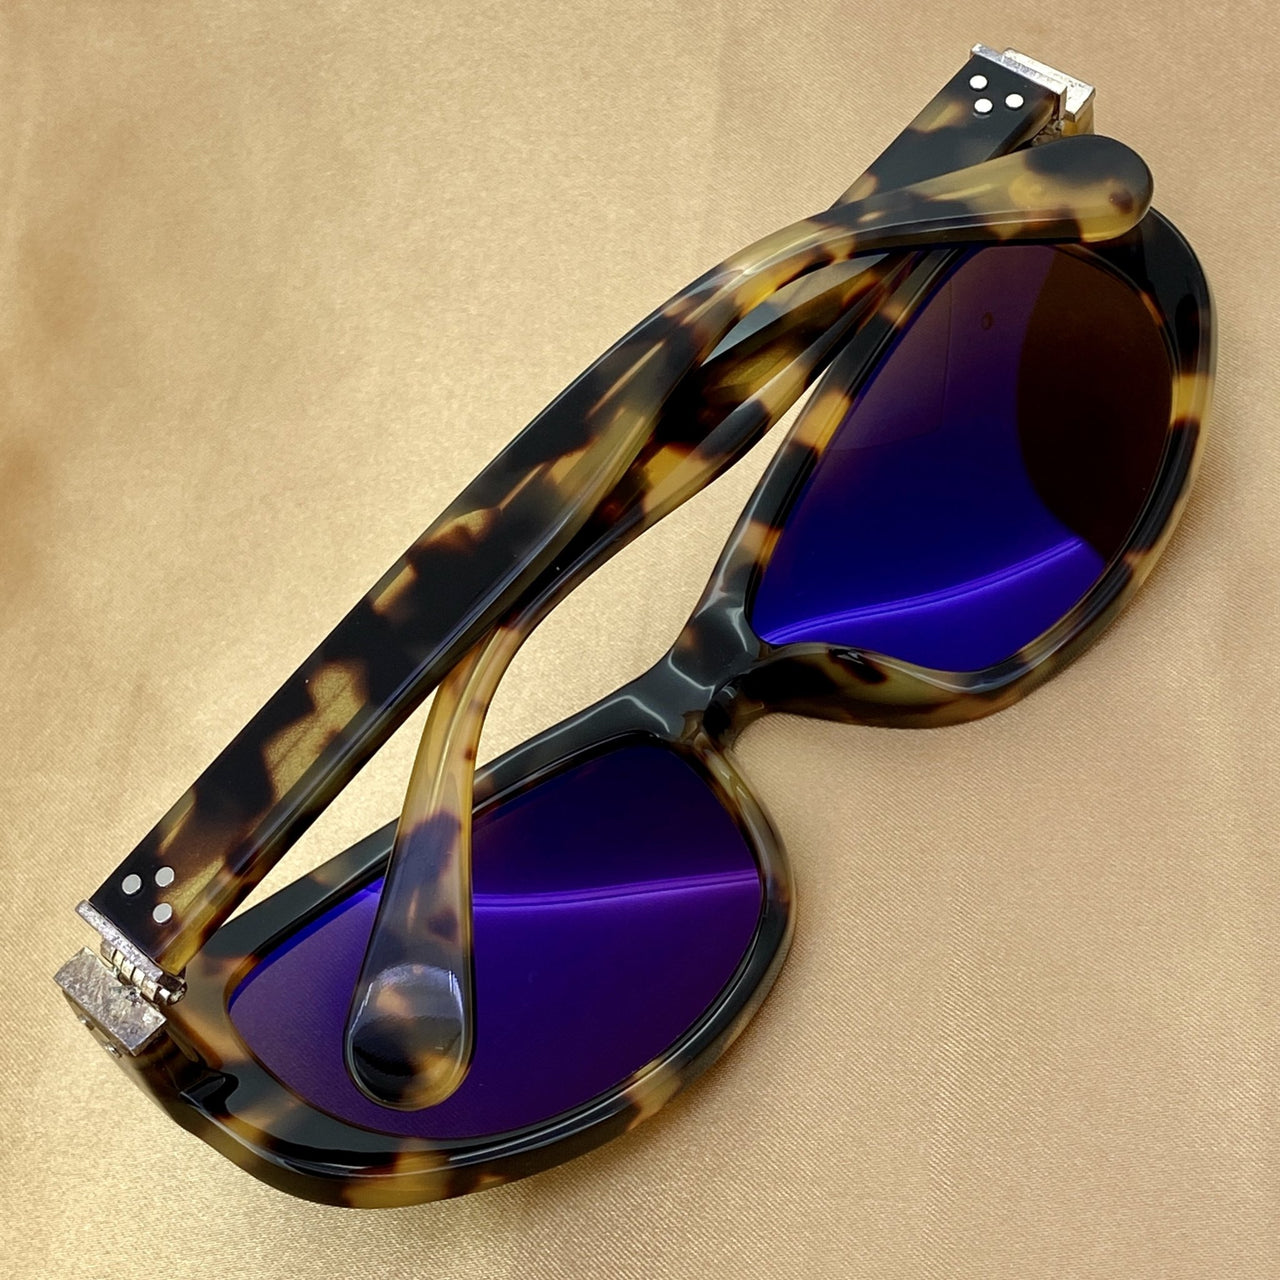 Ann Demeulemeester Sunglasses Cat Eye Tortoise Shell 925 Silver with Brown Lenses Category 3 Dark Tint AD29C2SUN - Watches & Crystals